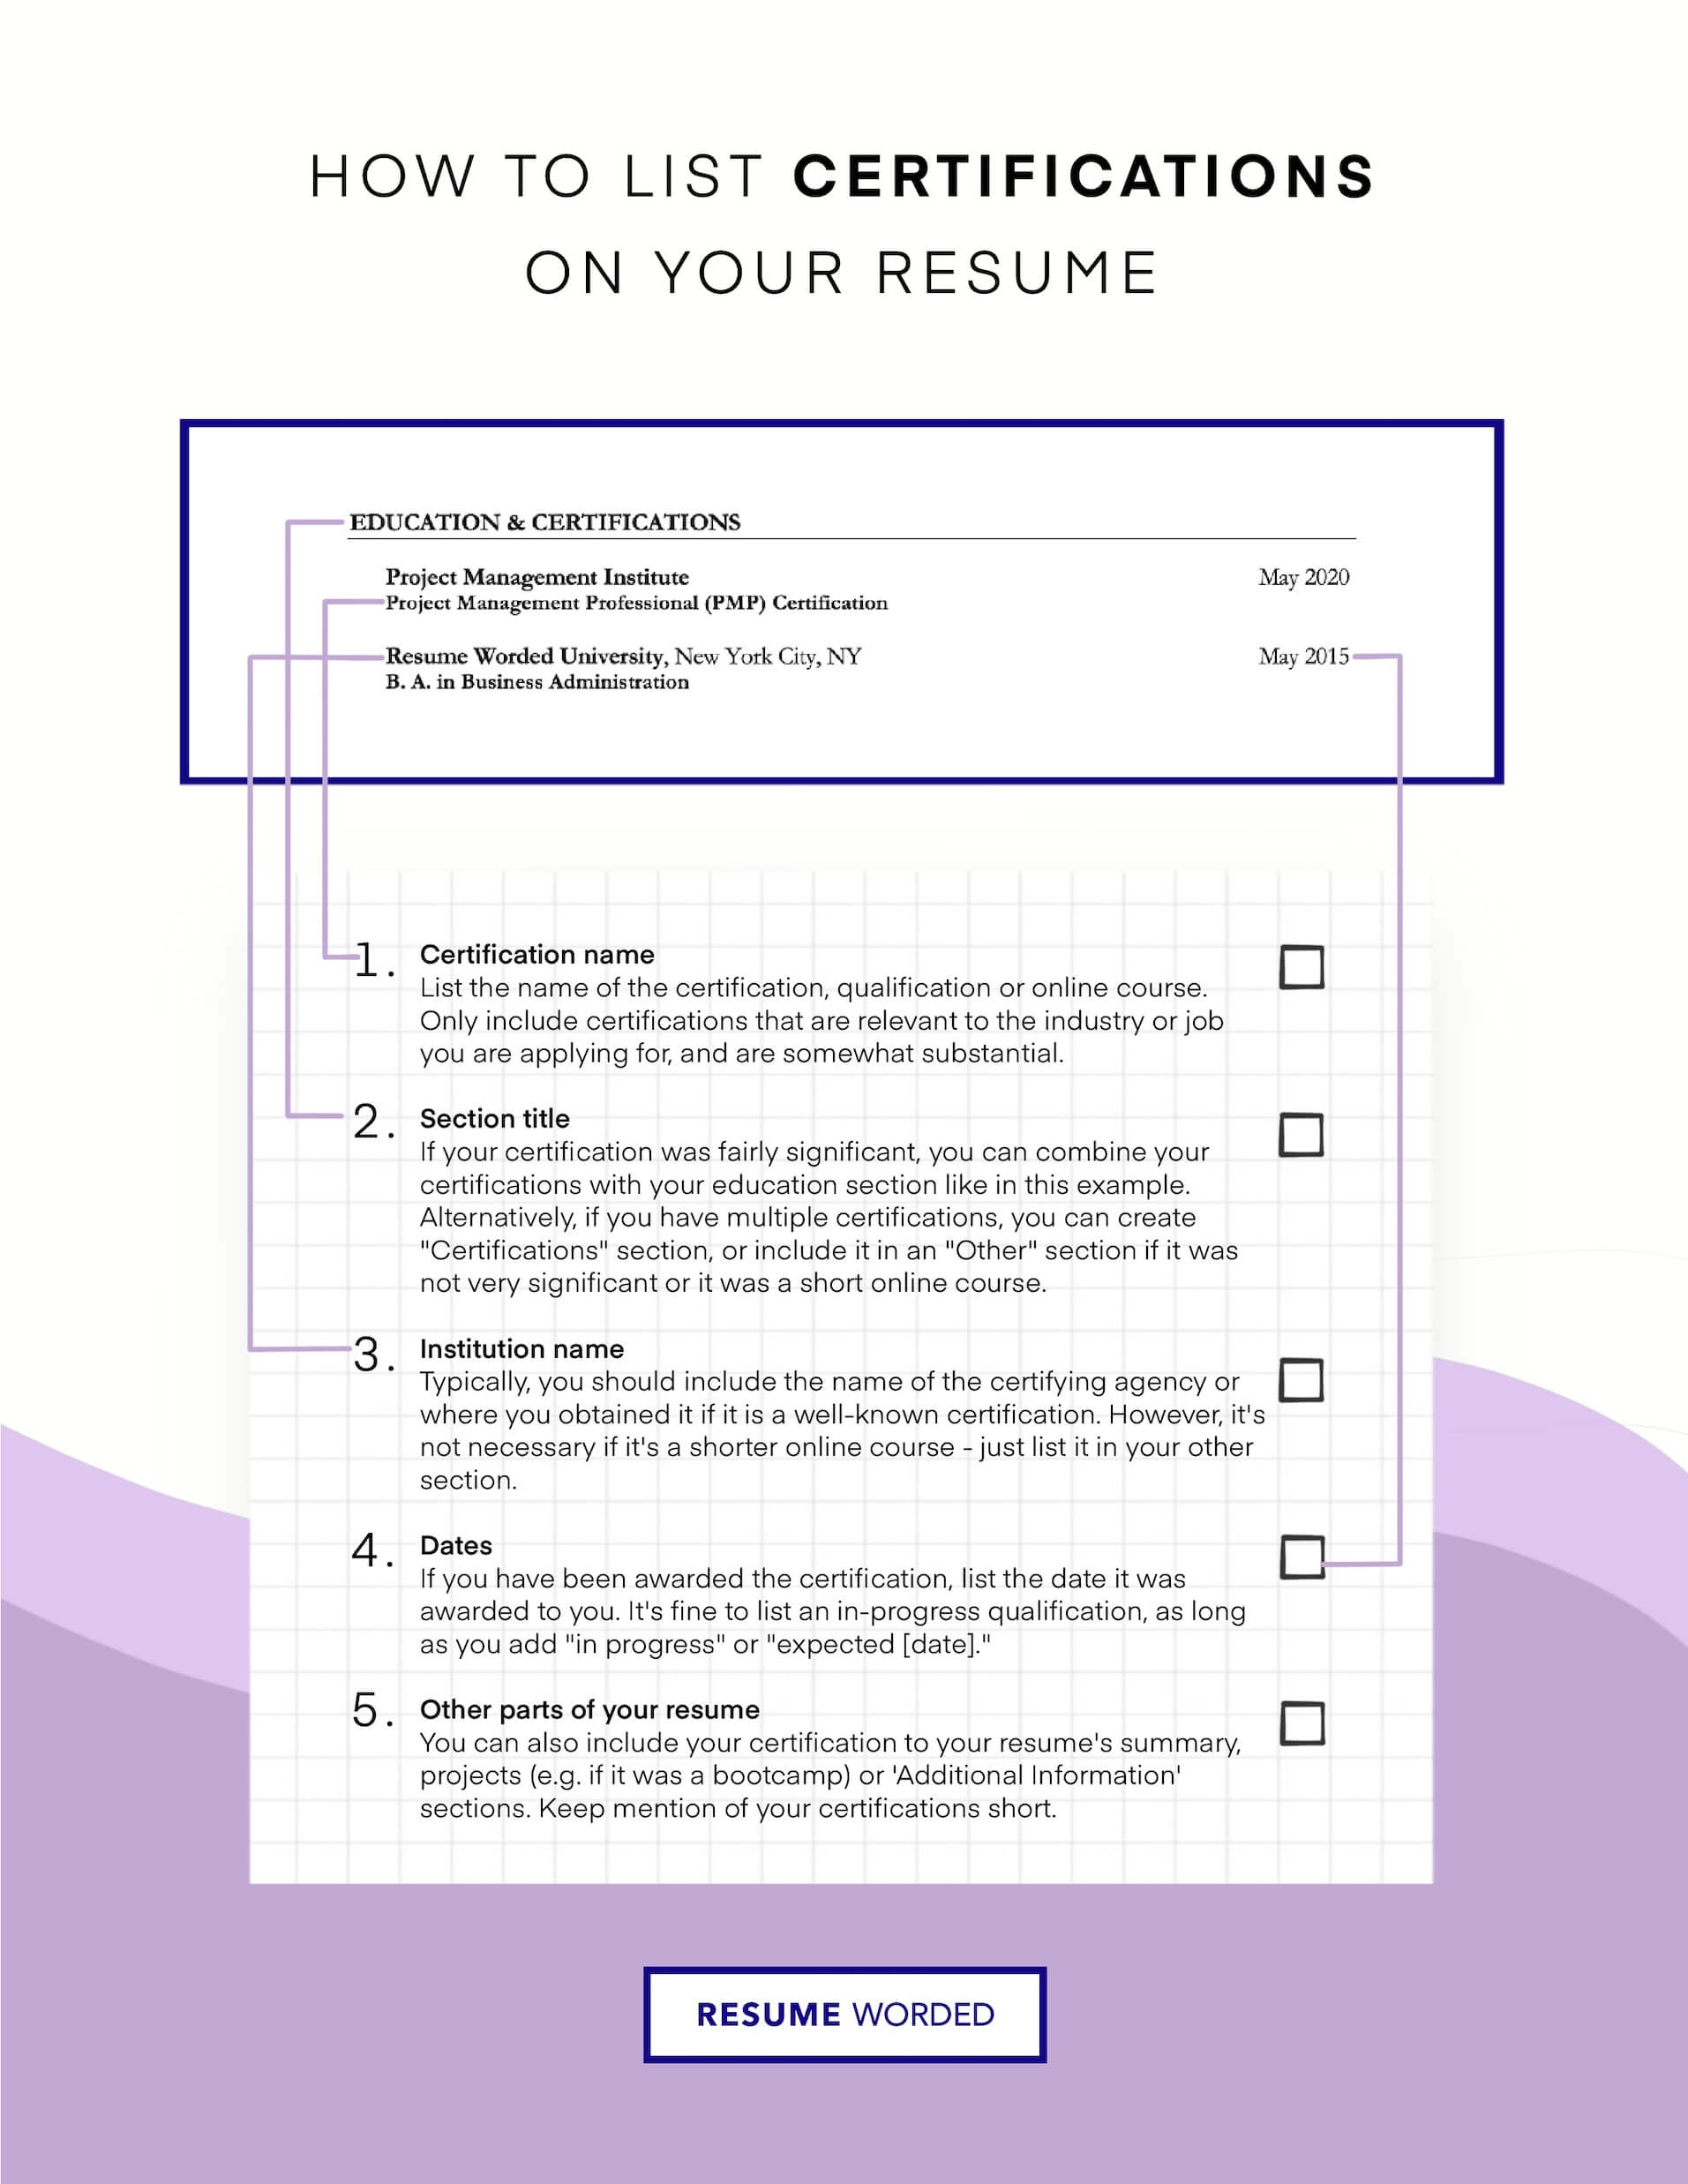 Include industry-relevant certifications. - Purchasing Manager  Resume